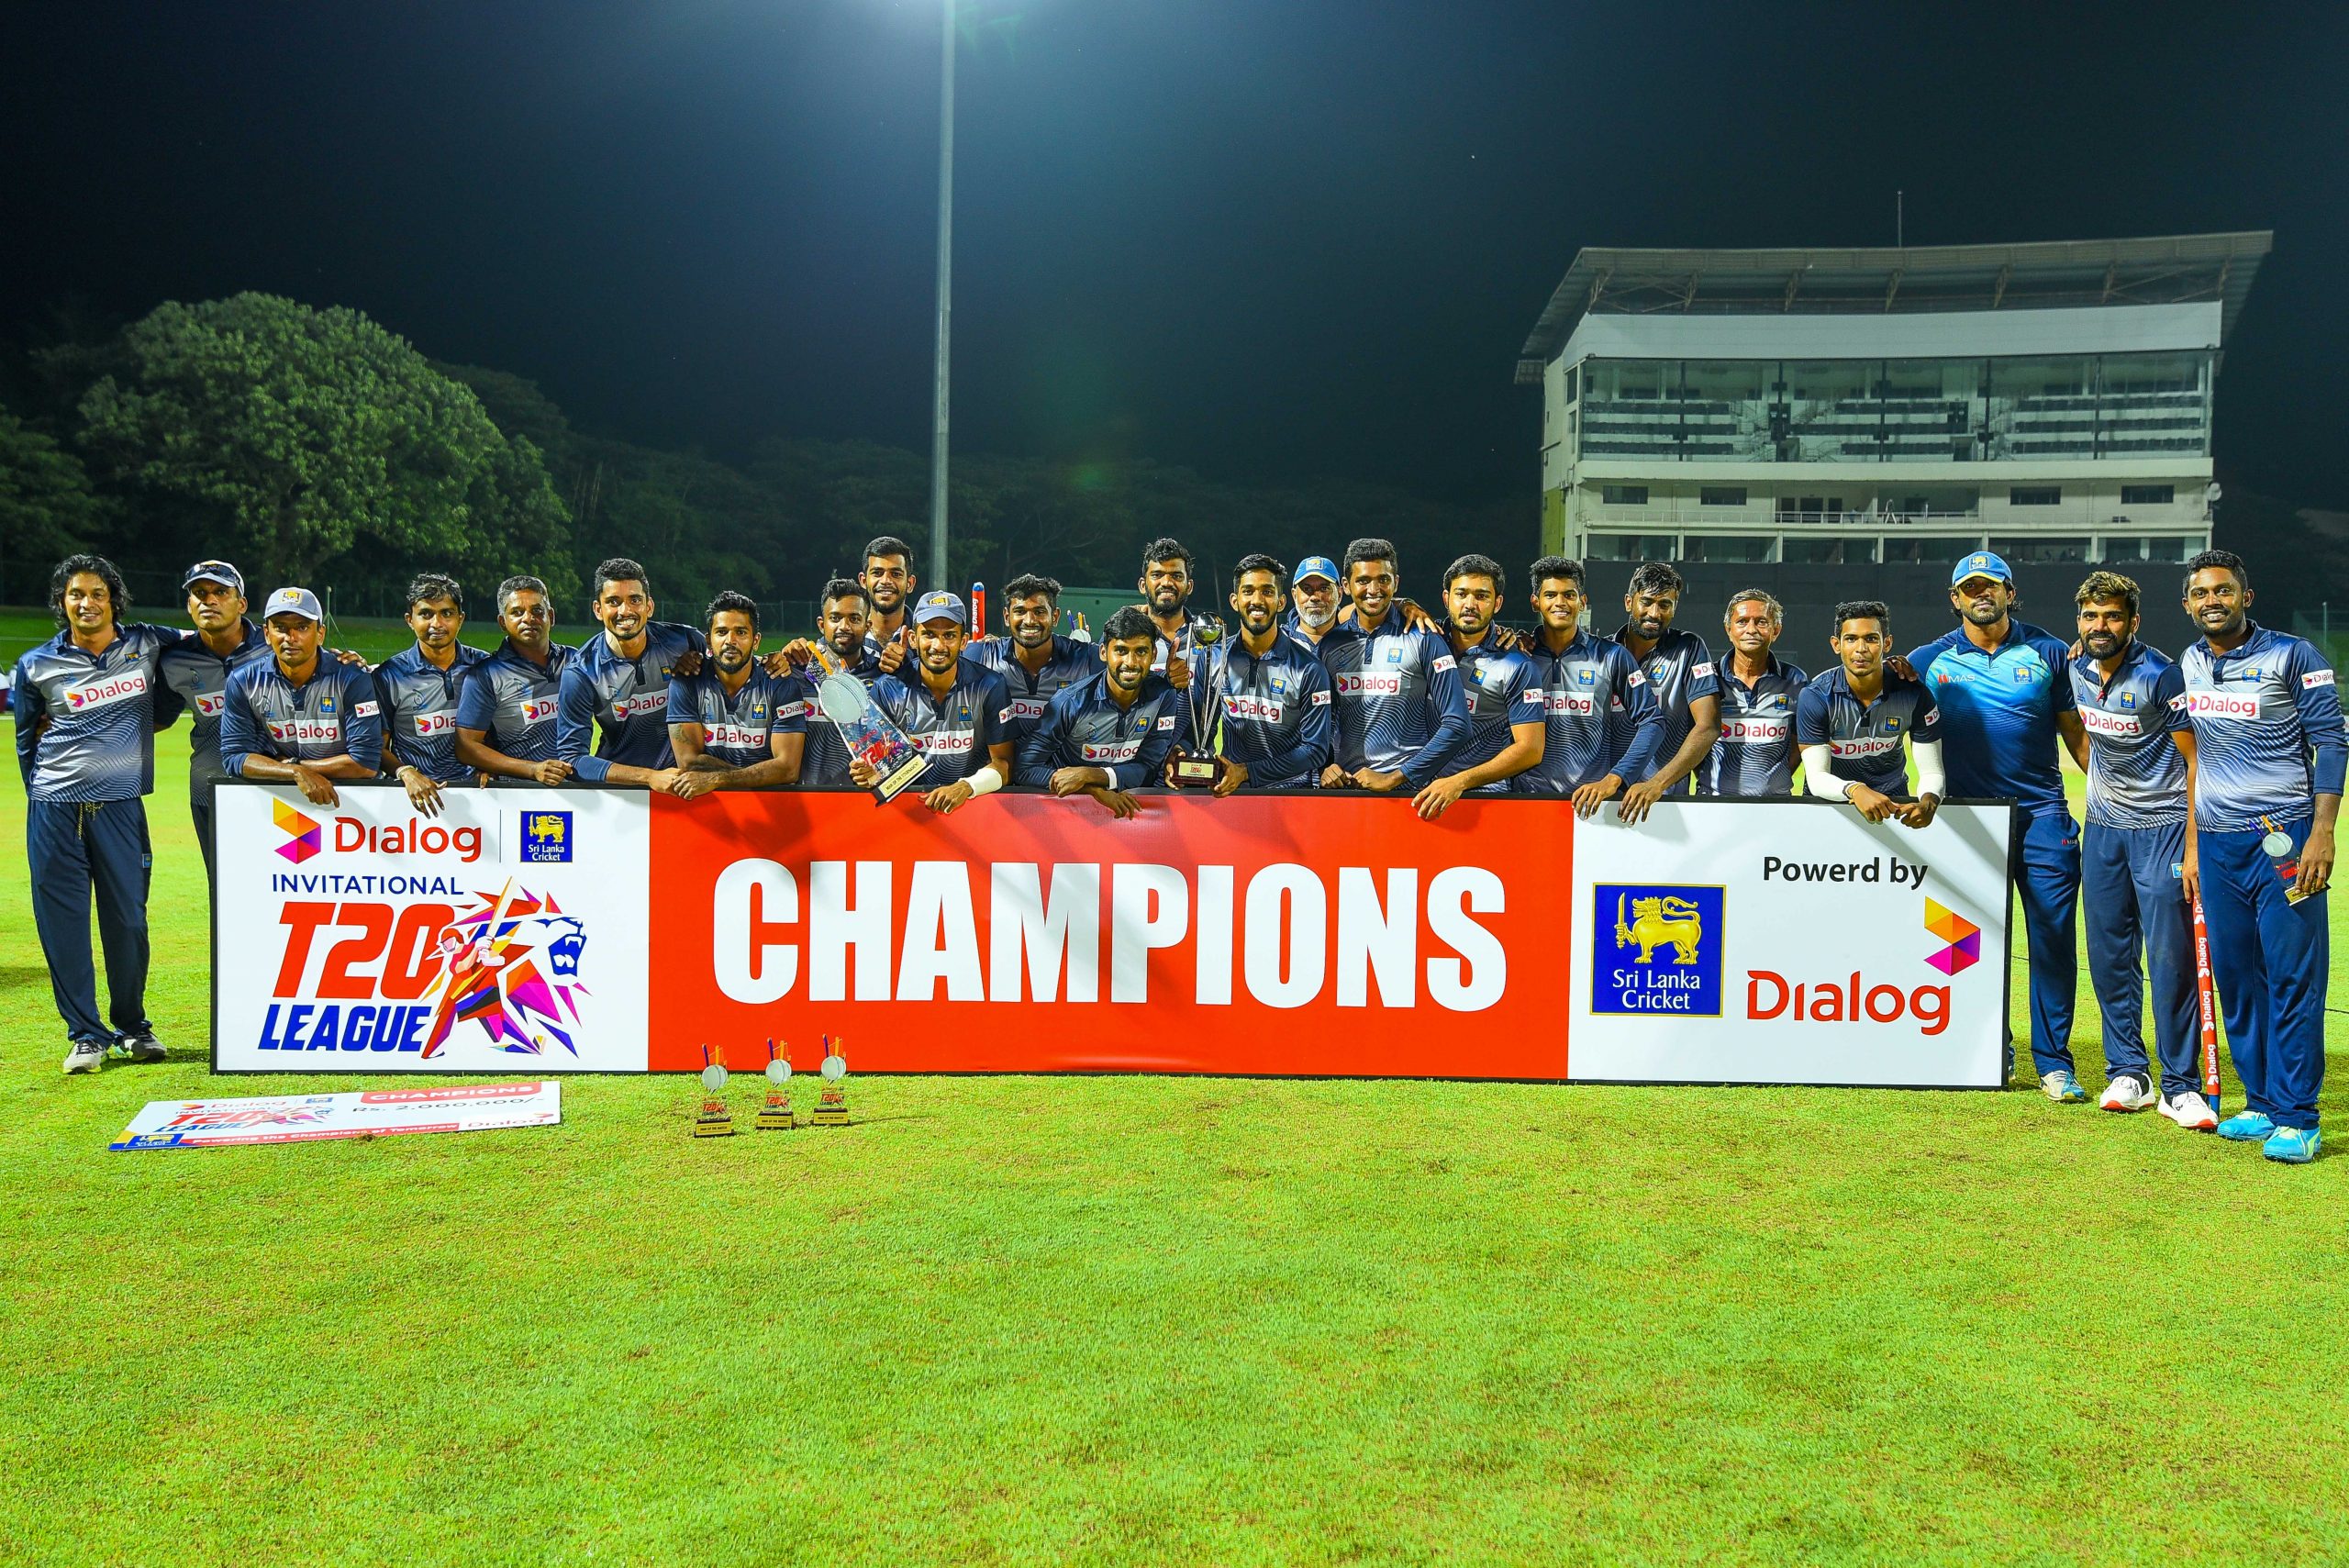 SLC Greys defeat SLC Reds by 42 runs to emerge SLC Invitational T20 League champs